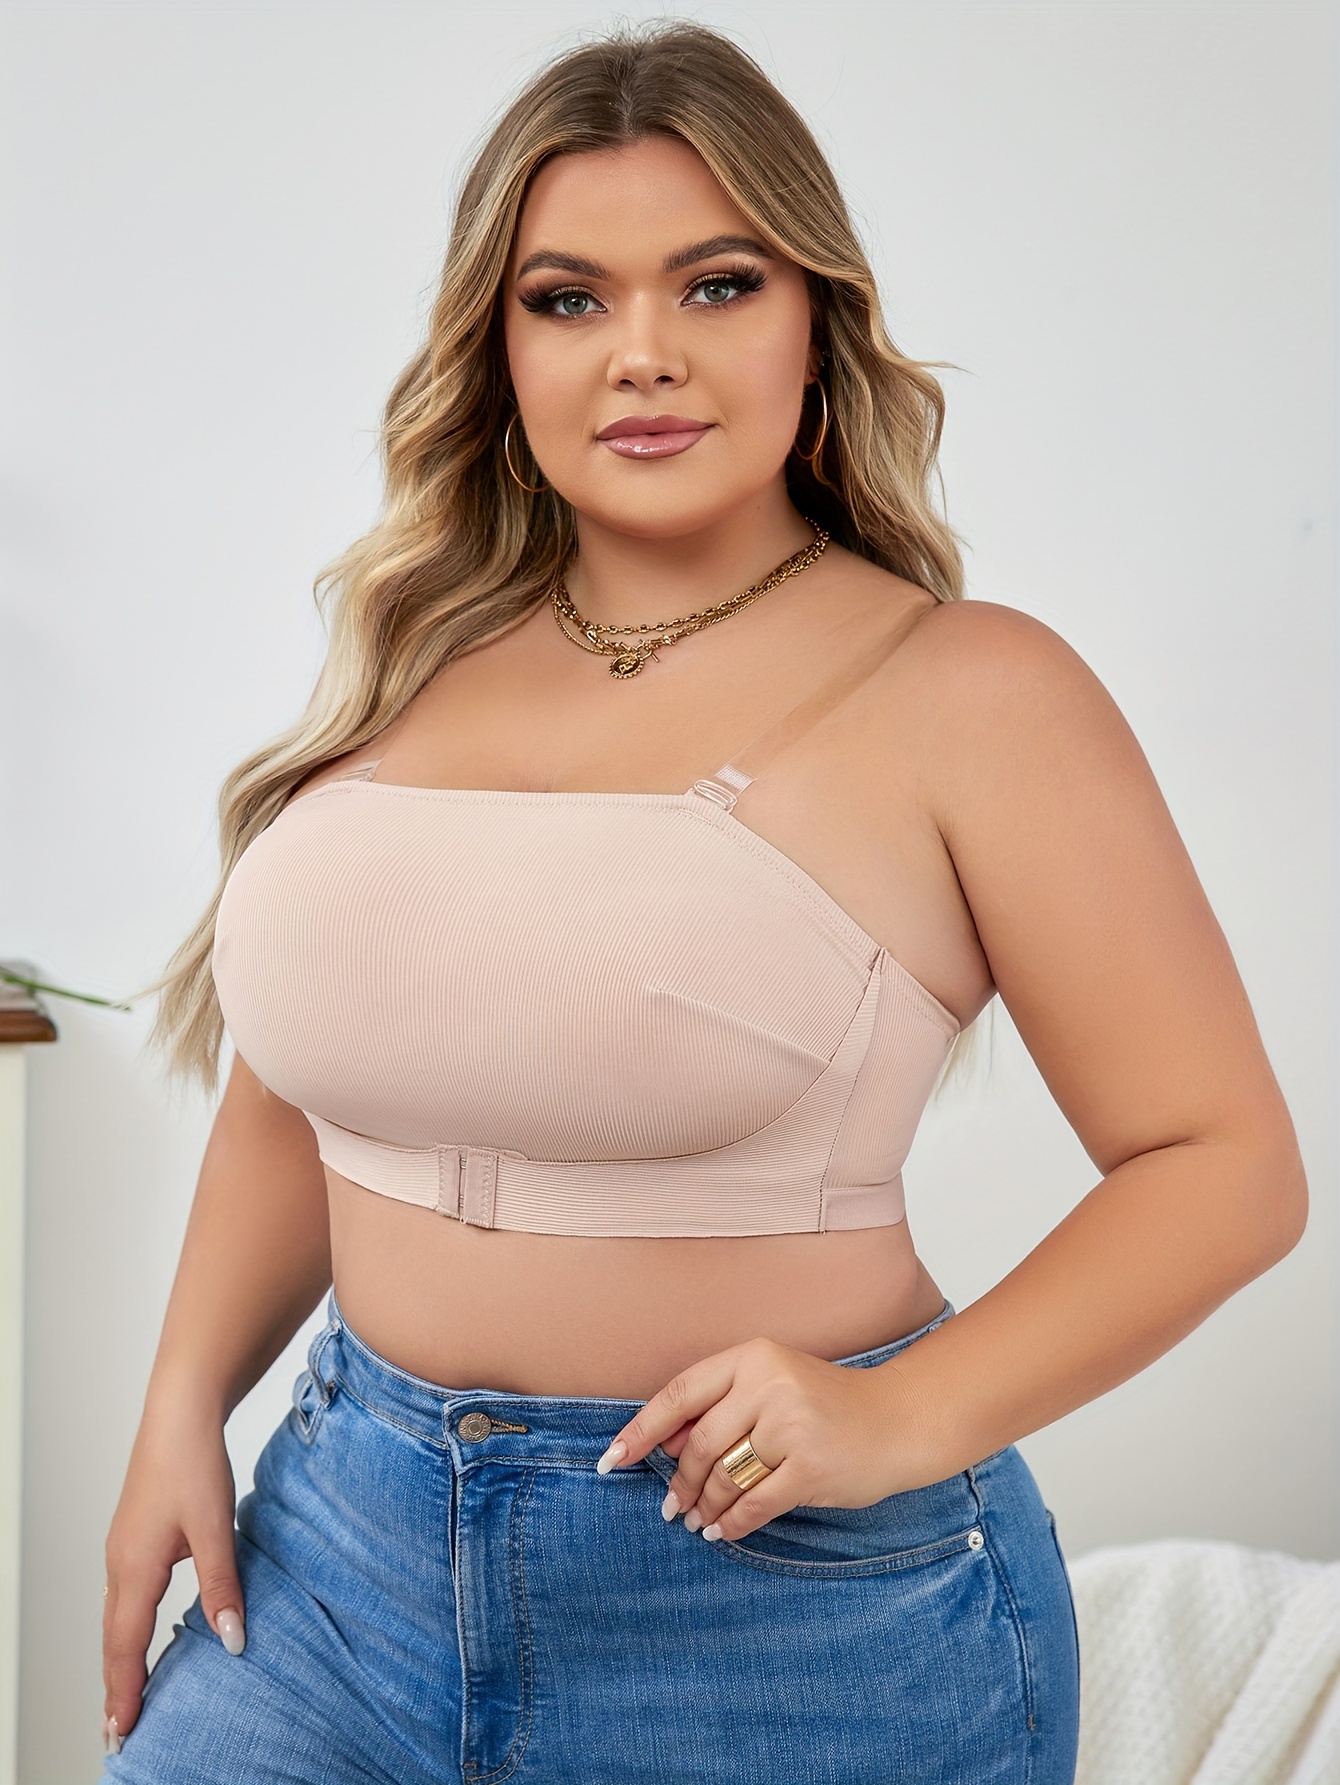 Strapless Tube Top Bra for Women Plus Size Padded Wirefree Bra